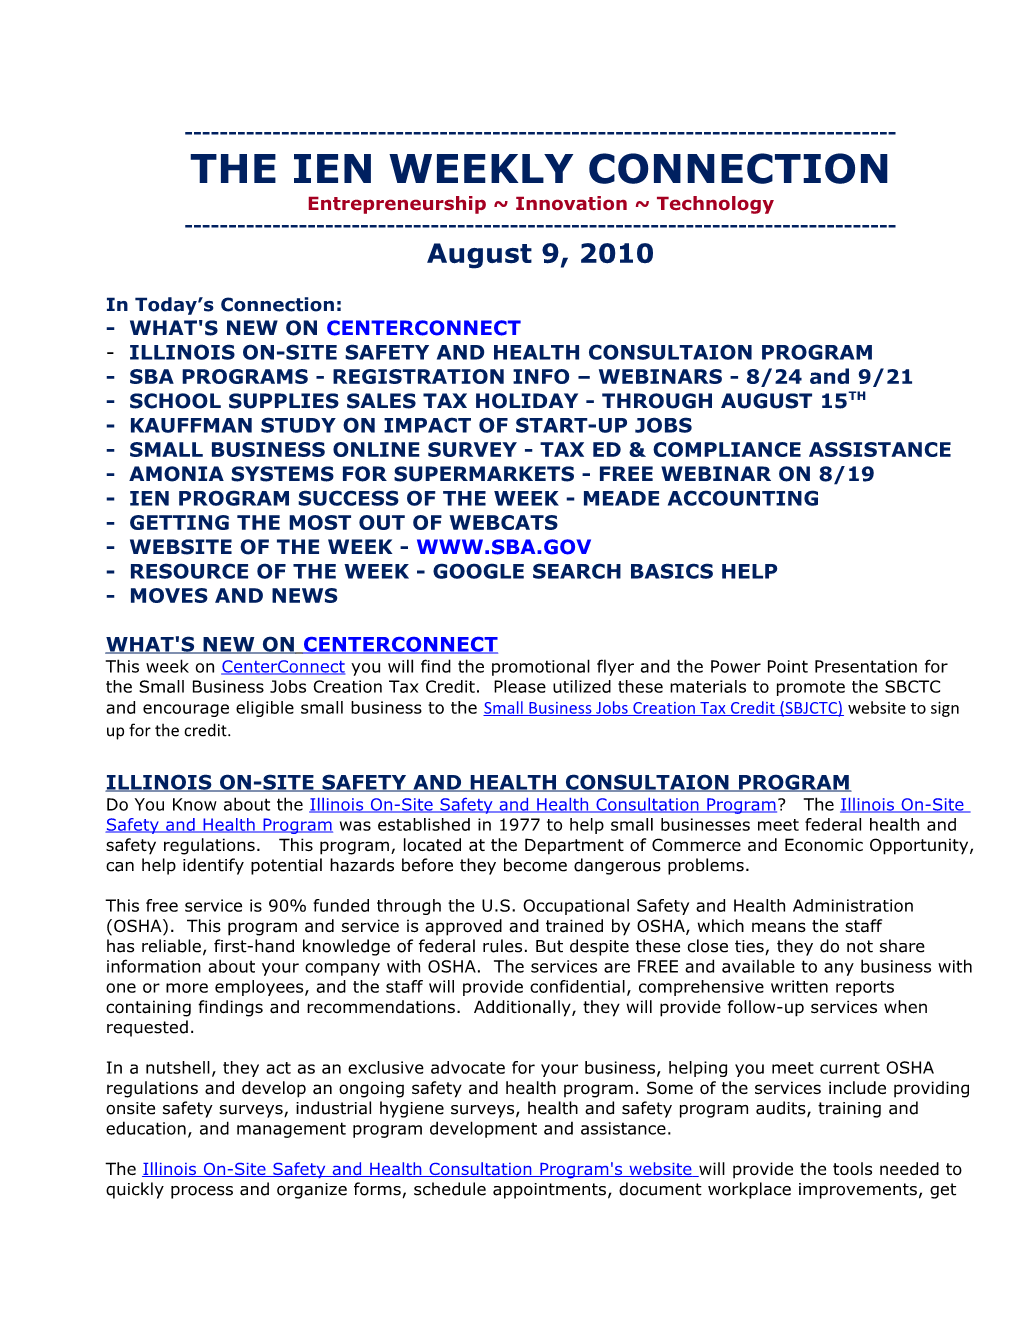 The Ien Weekly Connection s1